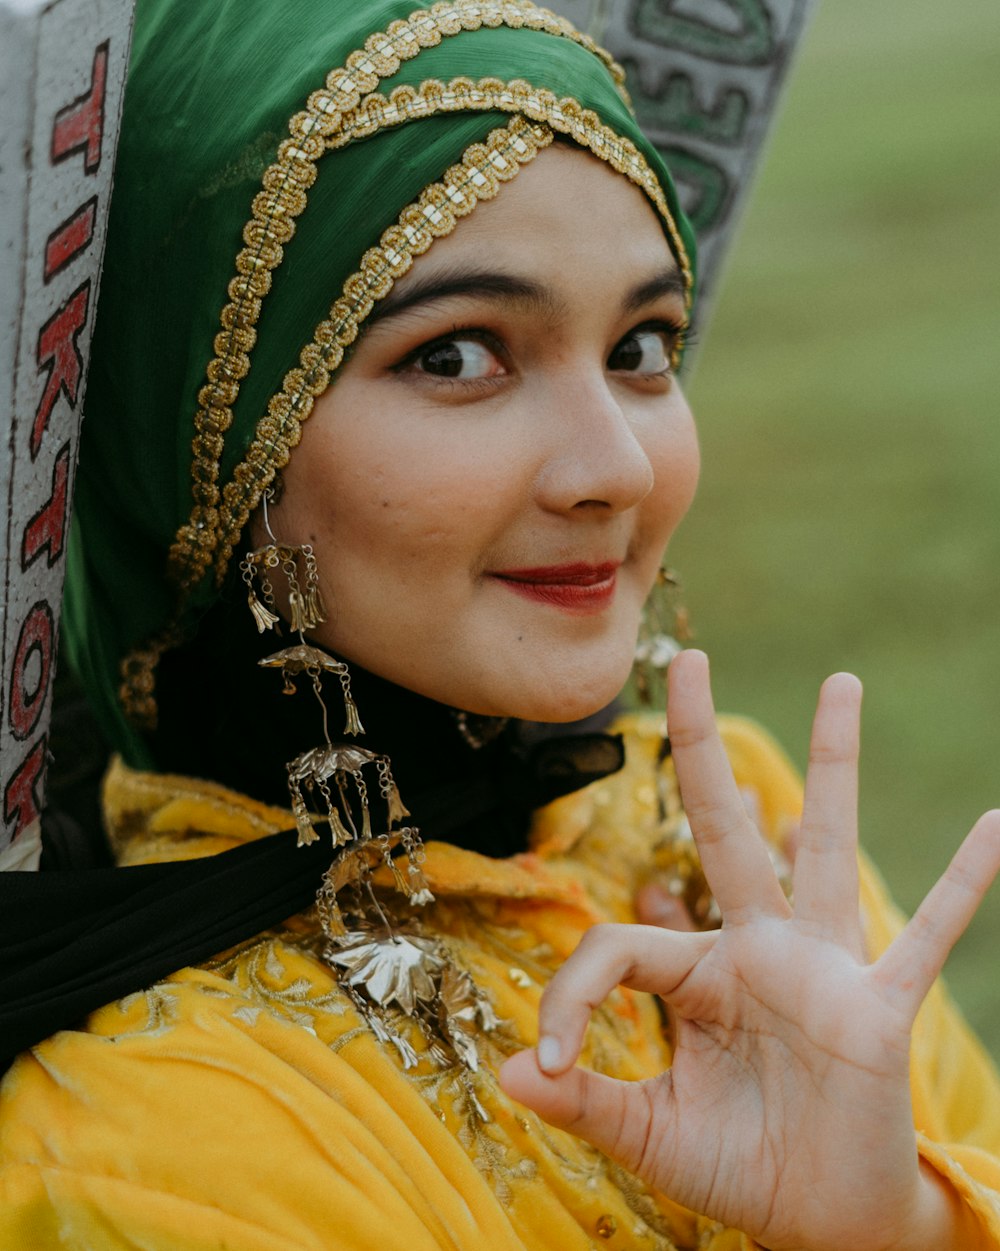 a woman in a green headdress making a peace sign